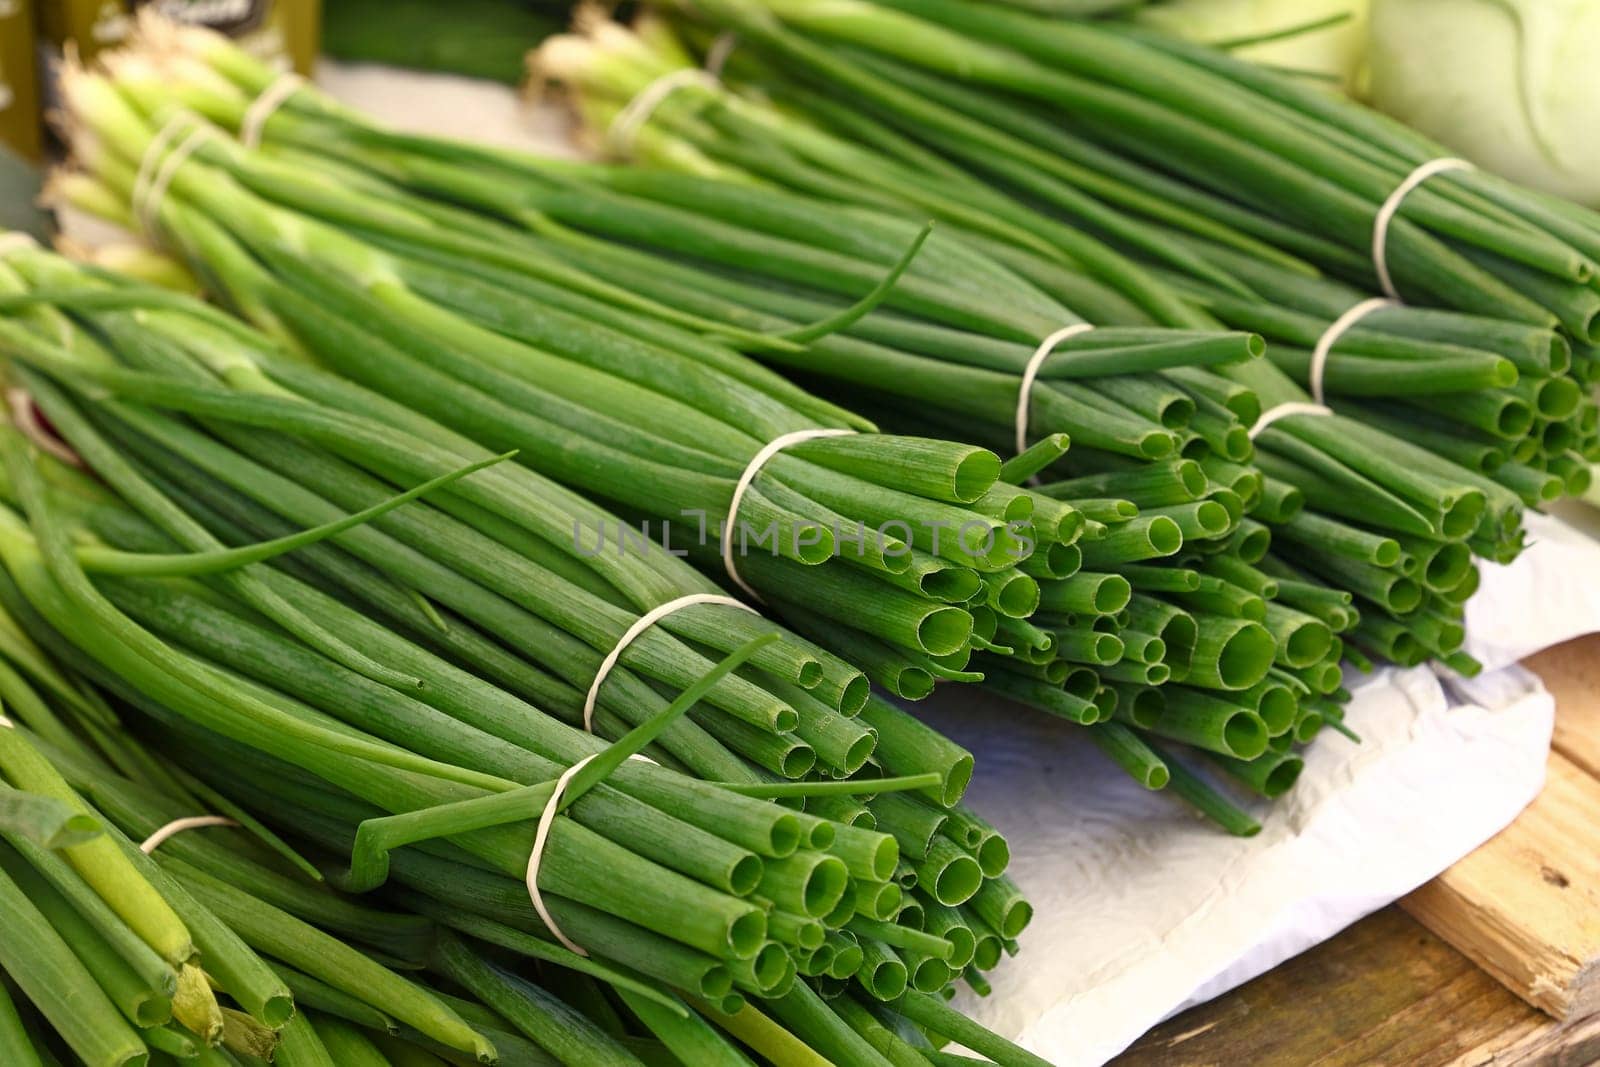 Heap of fresh green spring bunch onion, scallion or chive on farmers market display, close up, high angle view